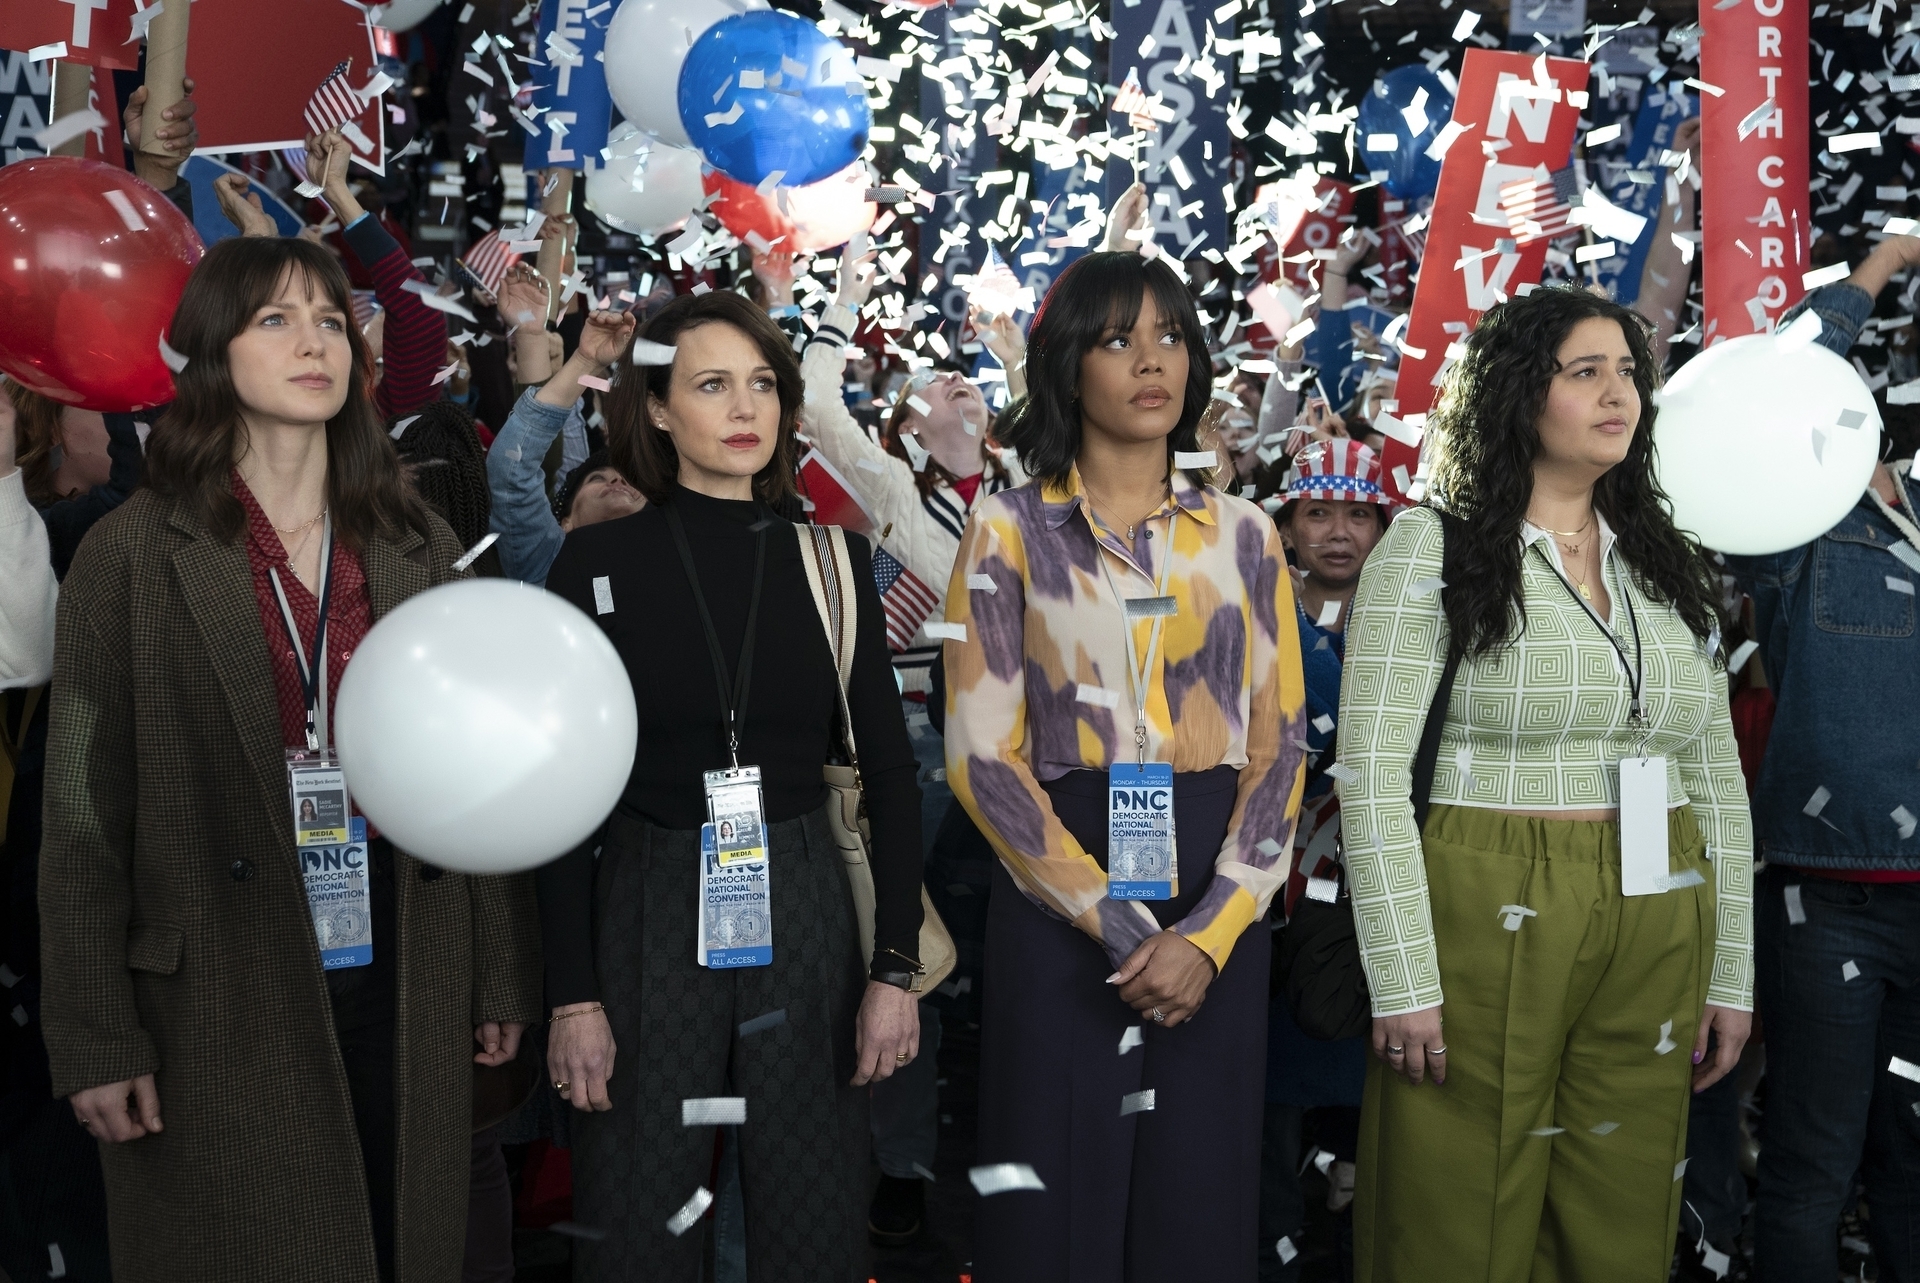 Four women at a political event with American flags and confetti. They are looking up, entranced